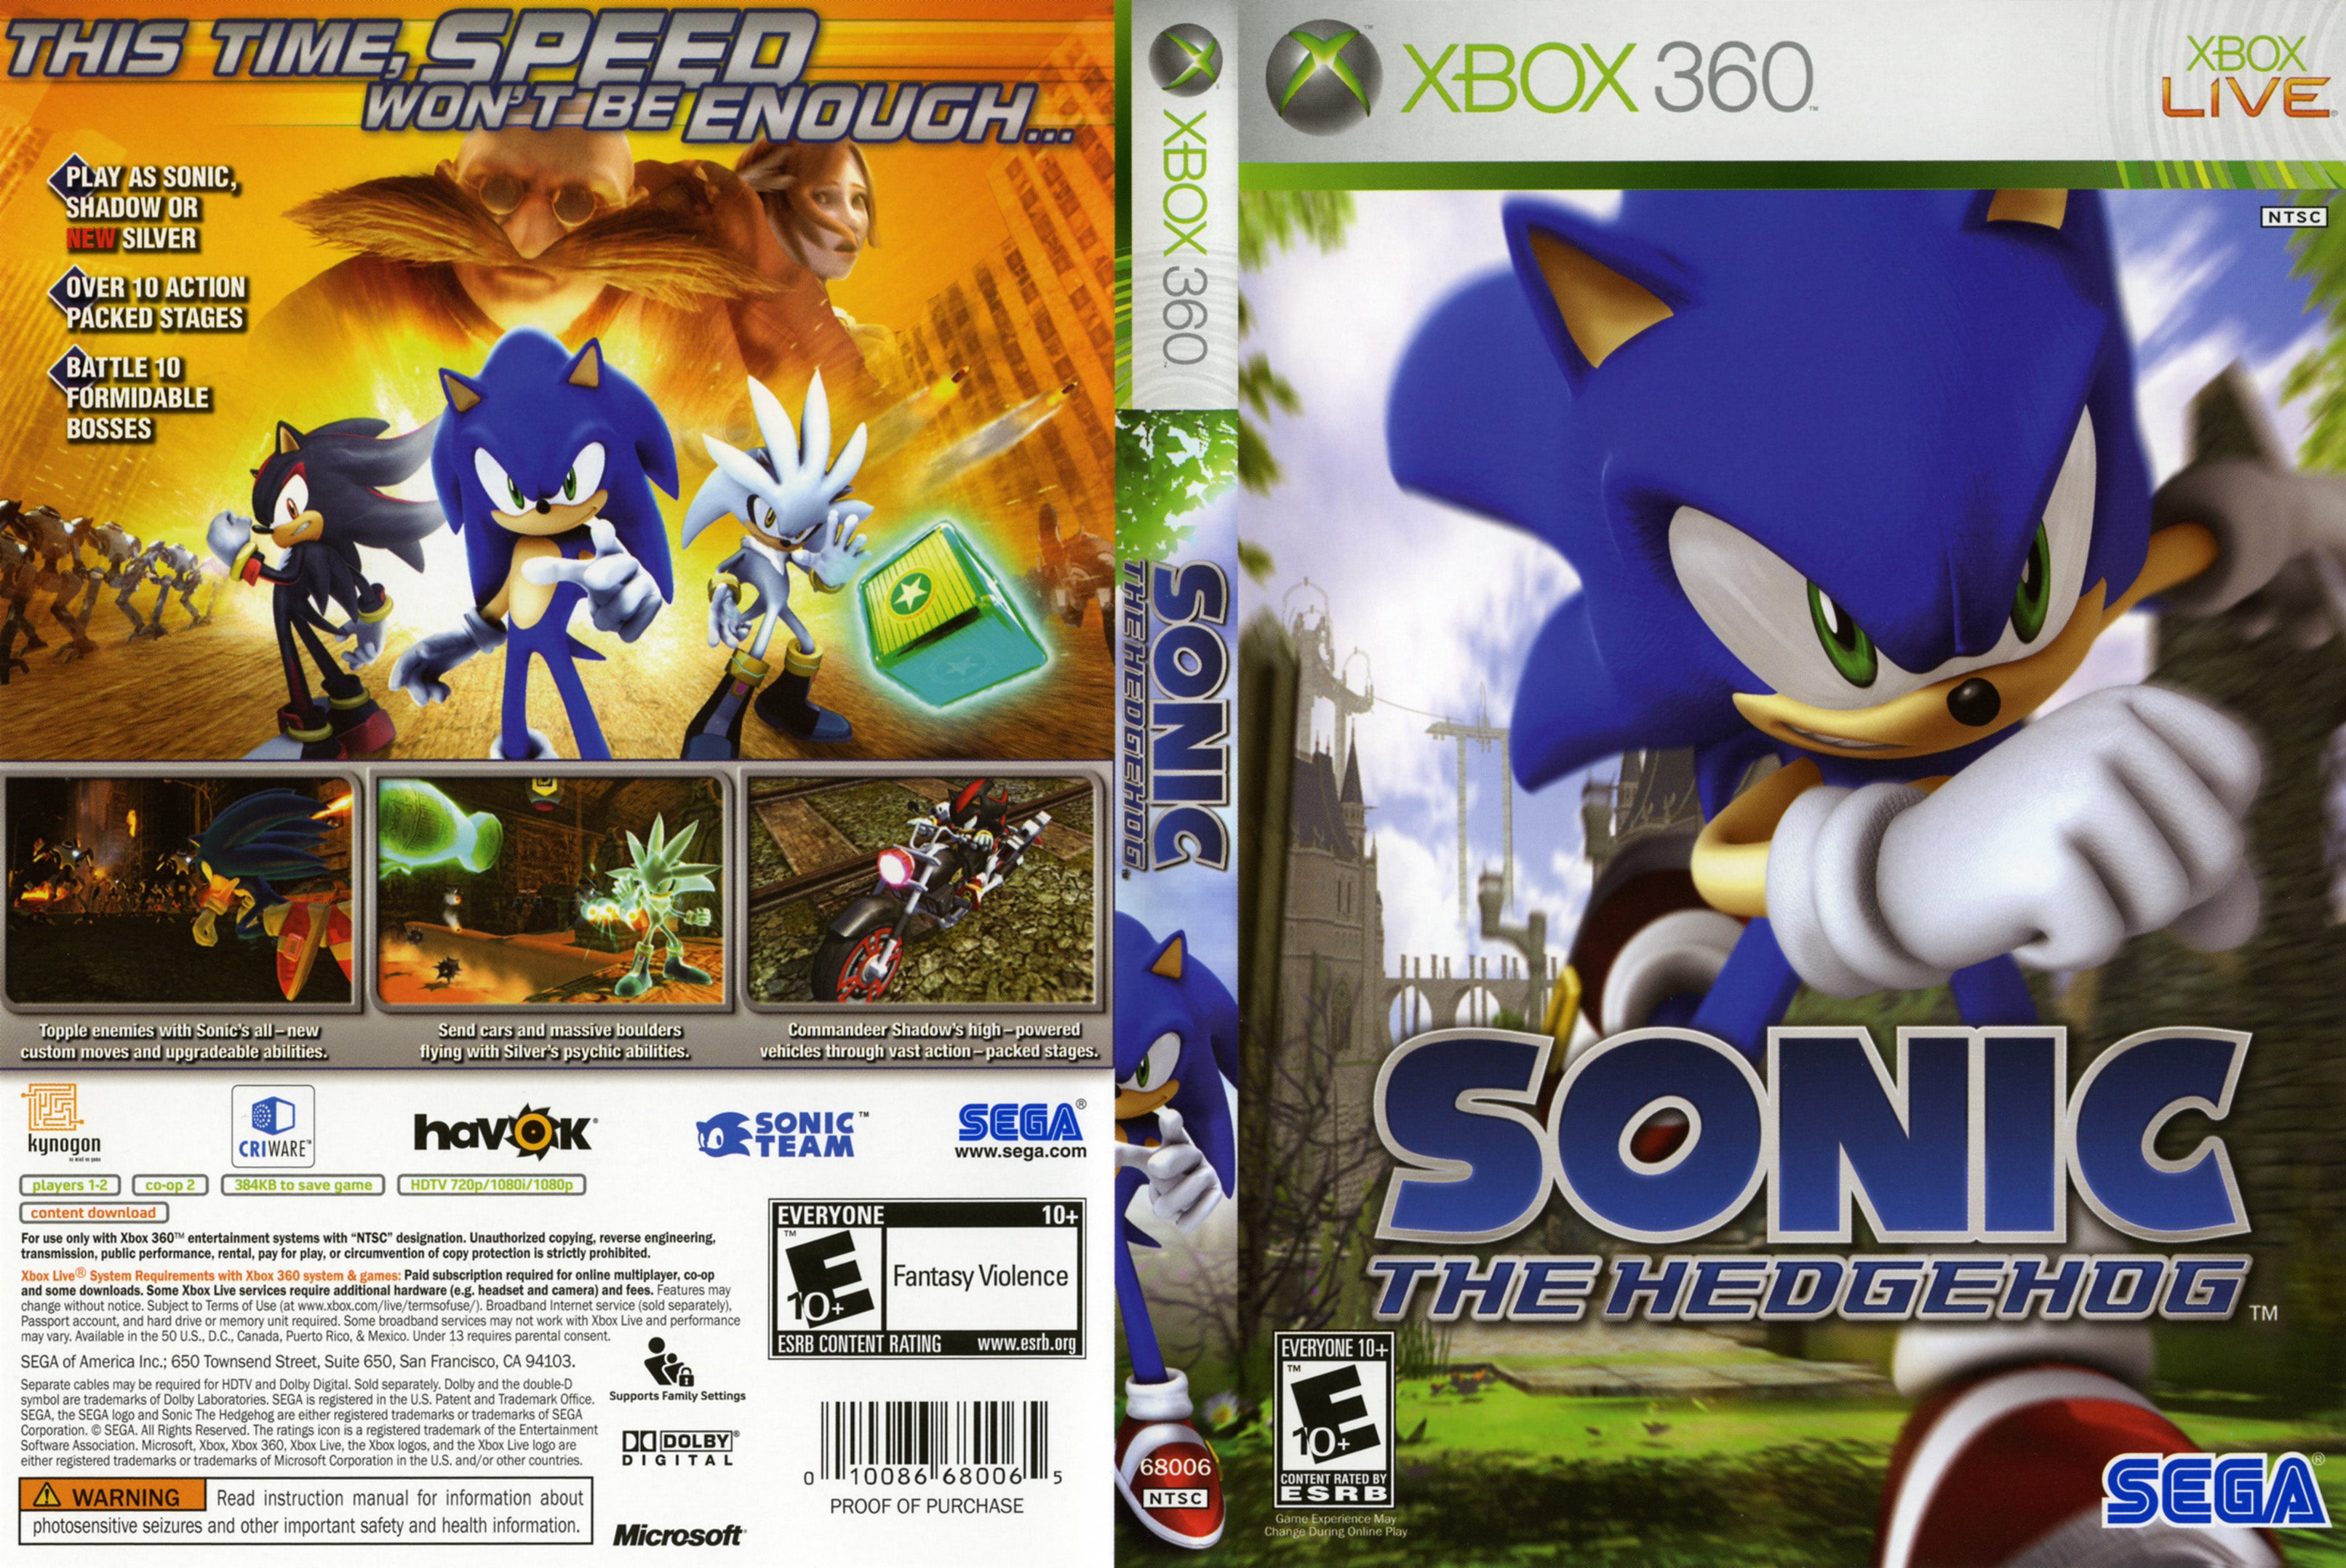 Sonic the Hedgehog (Platinum Hits) for Xbox360